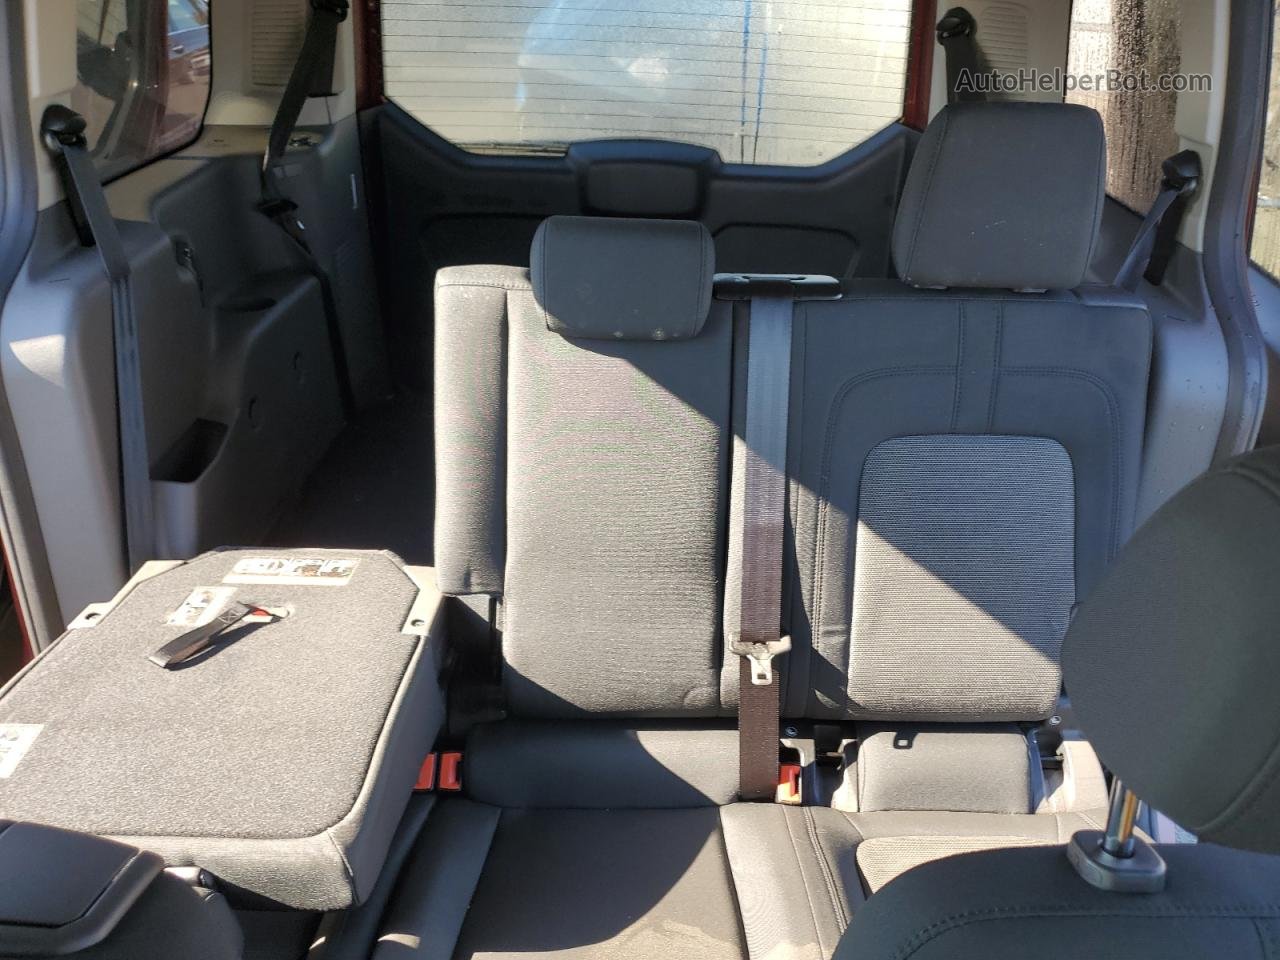 2020 Ford Transit Connect Xl Темно-бордовый vin: NM0GE9E2XL1446506